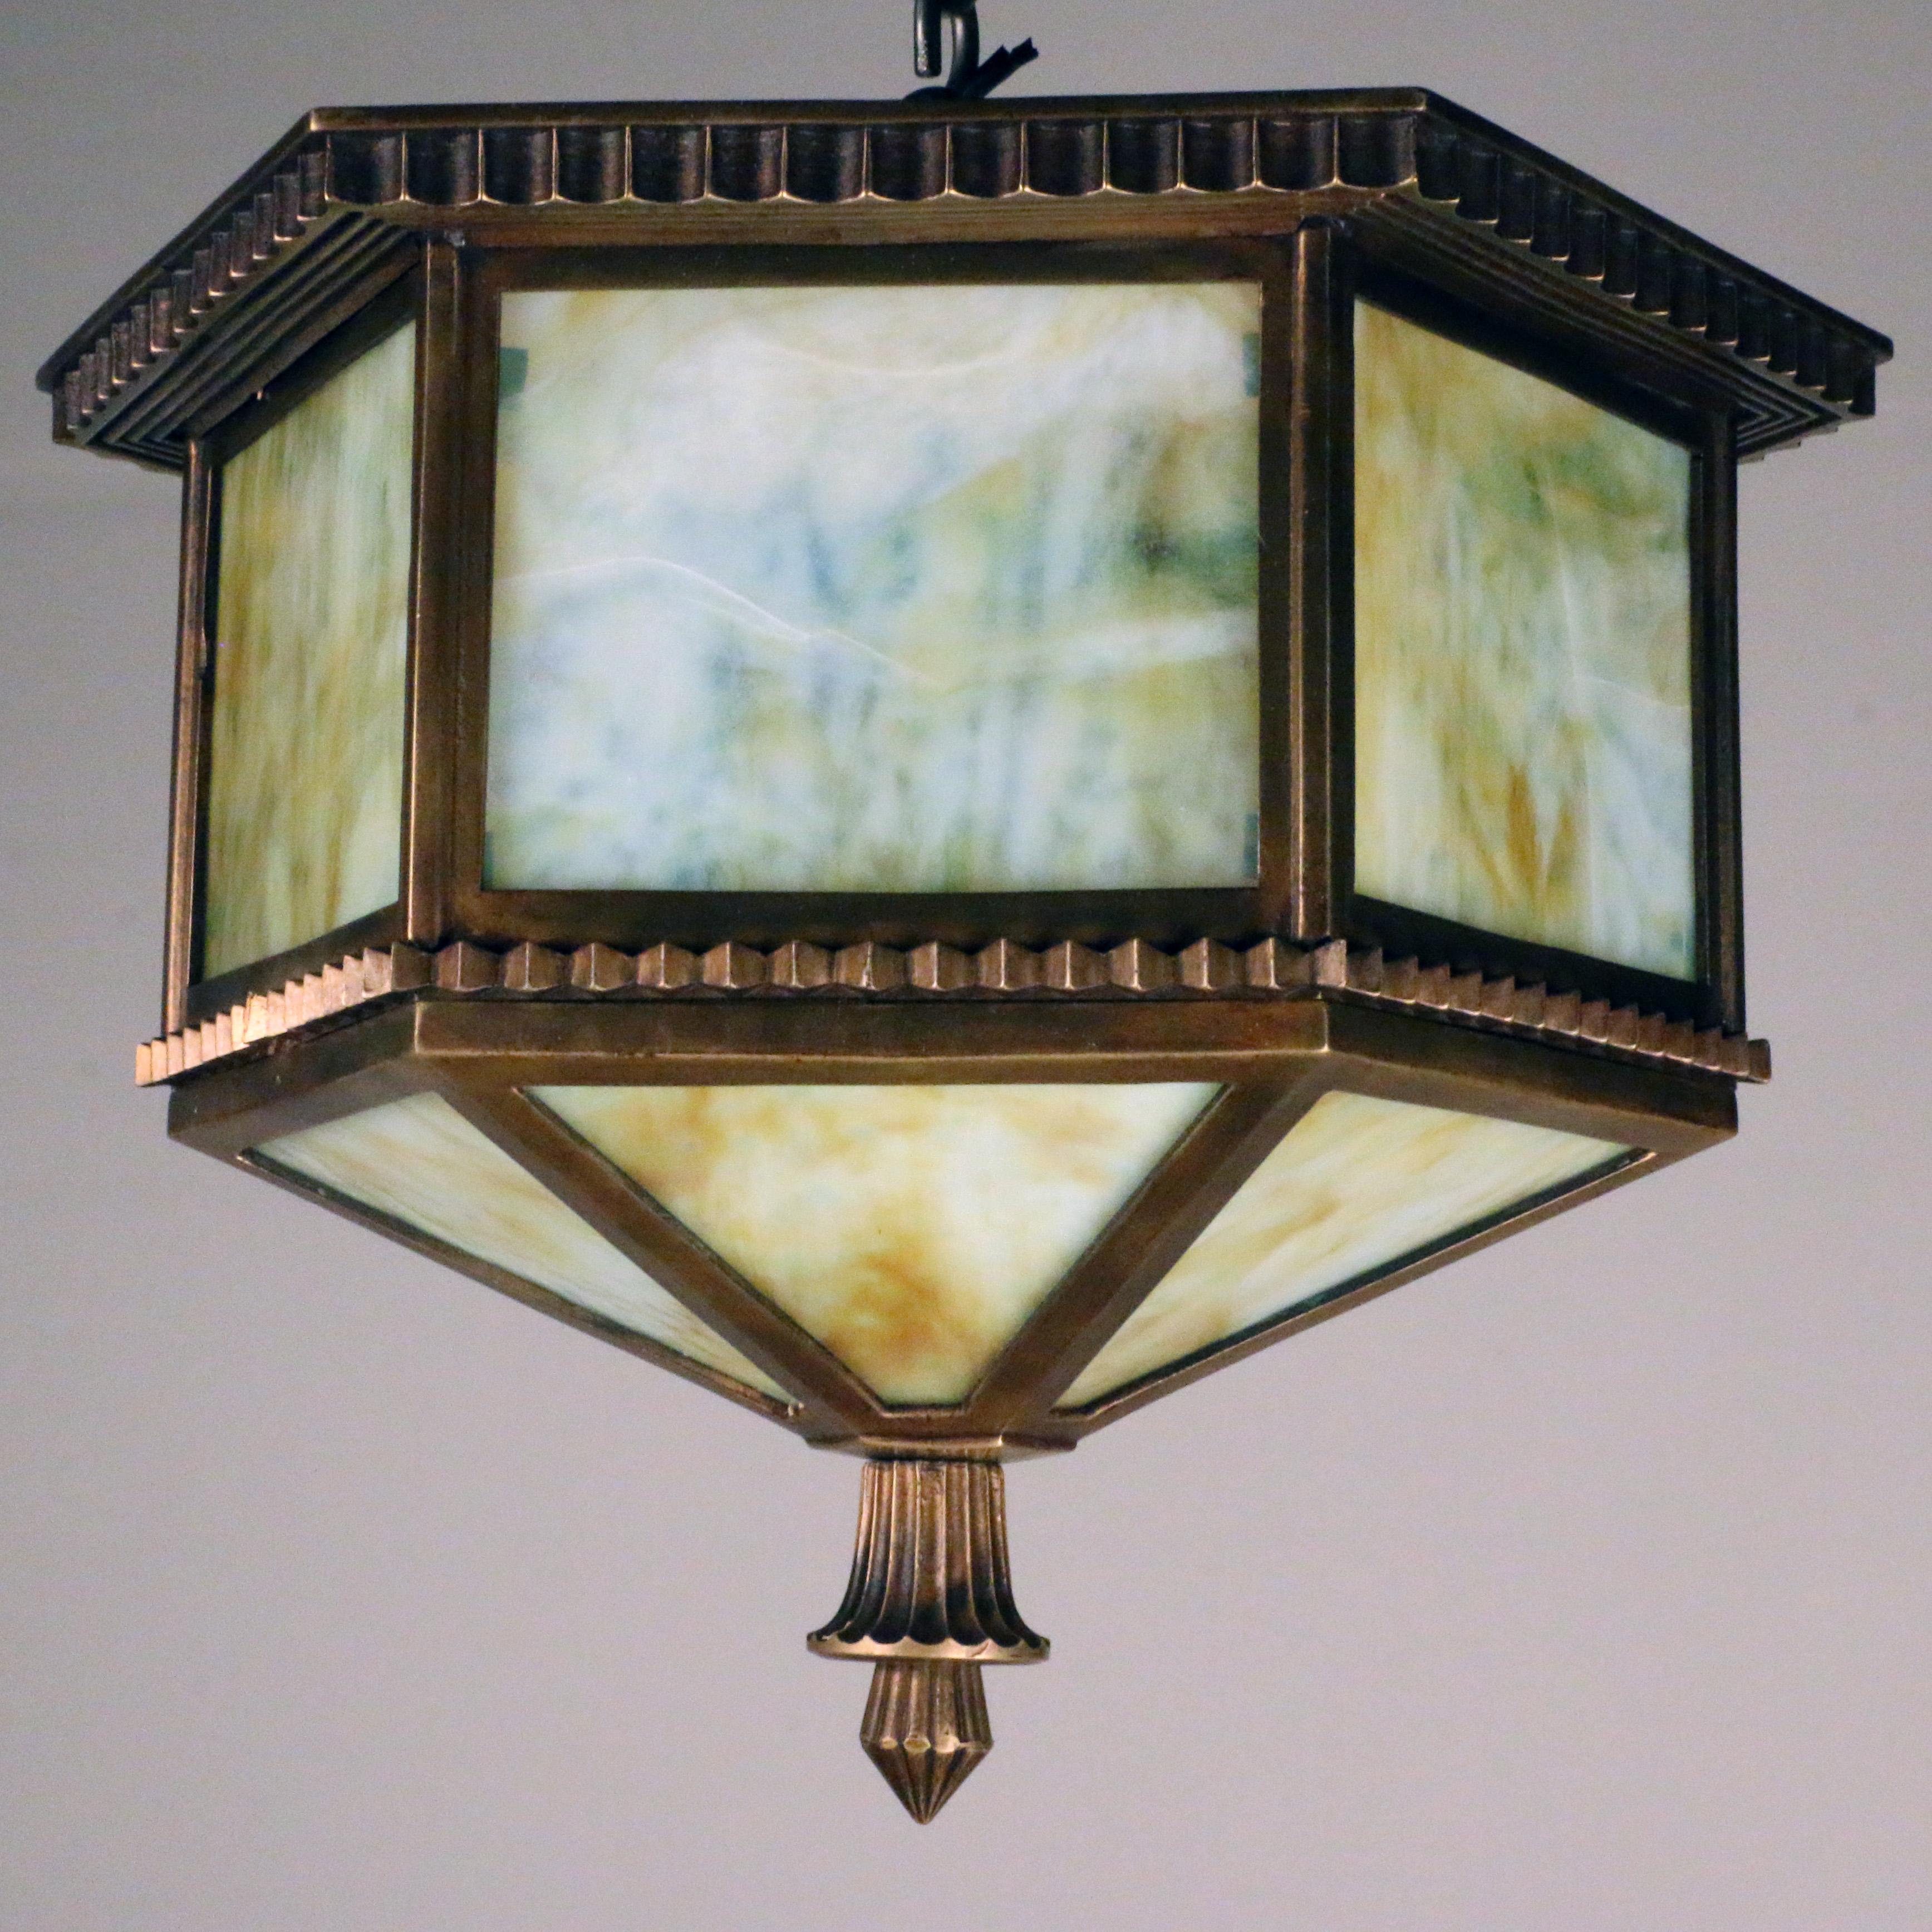 This well-cast bronze fixture has a wonderful patina that is enhanced by the art glass green slag panels.
From the paneled sides and base it emits a soft glow when lit. It is of substantial weight and quality..built to last.
This lantern is on the